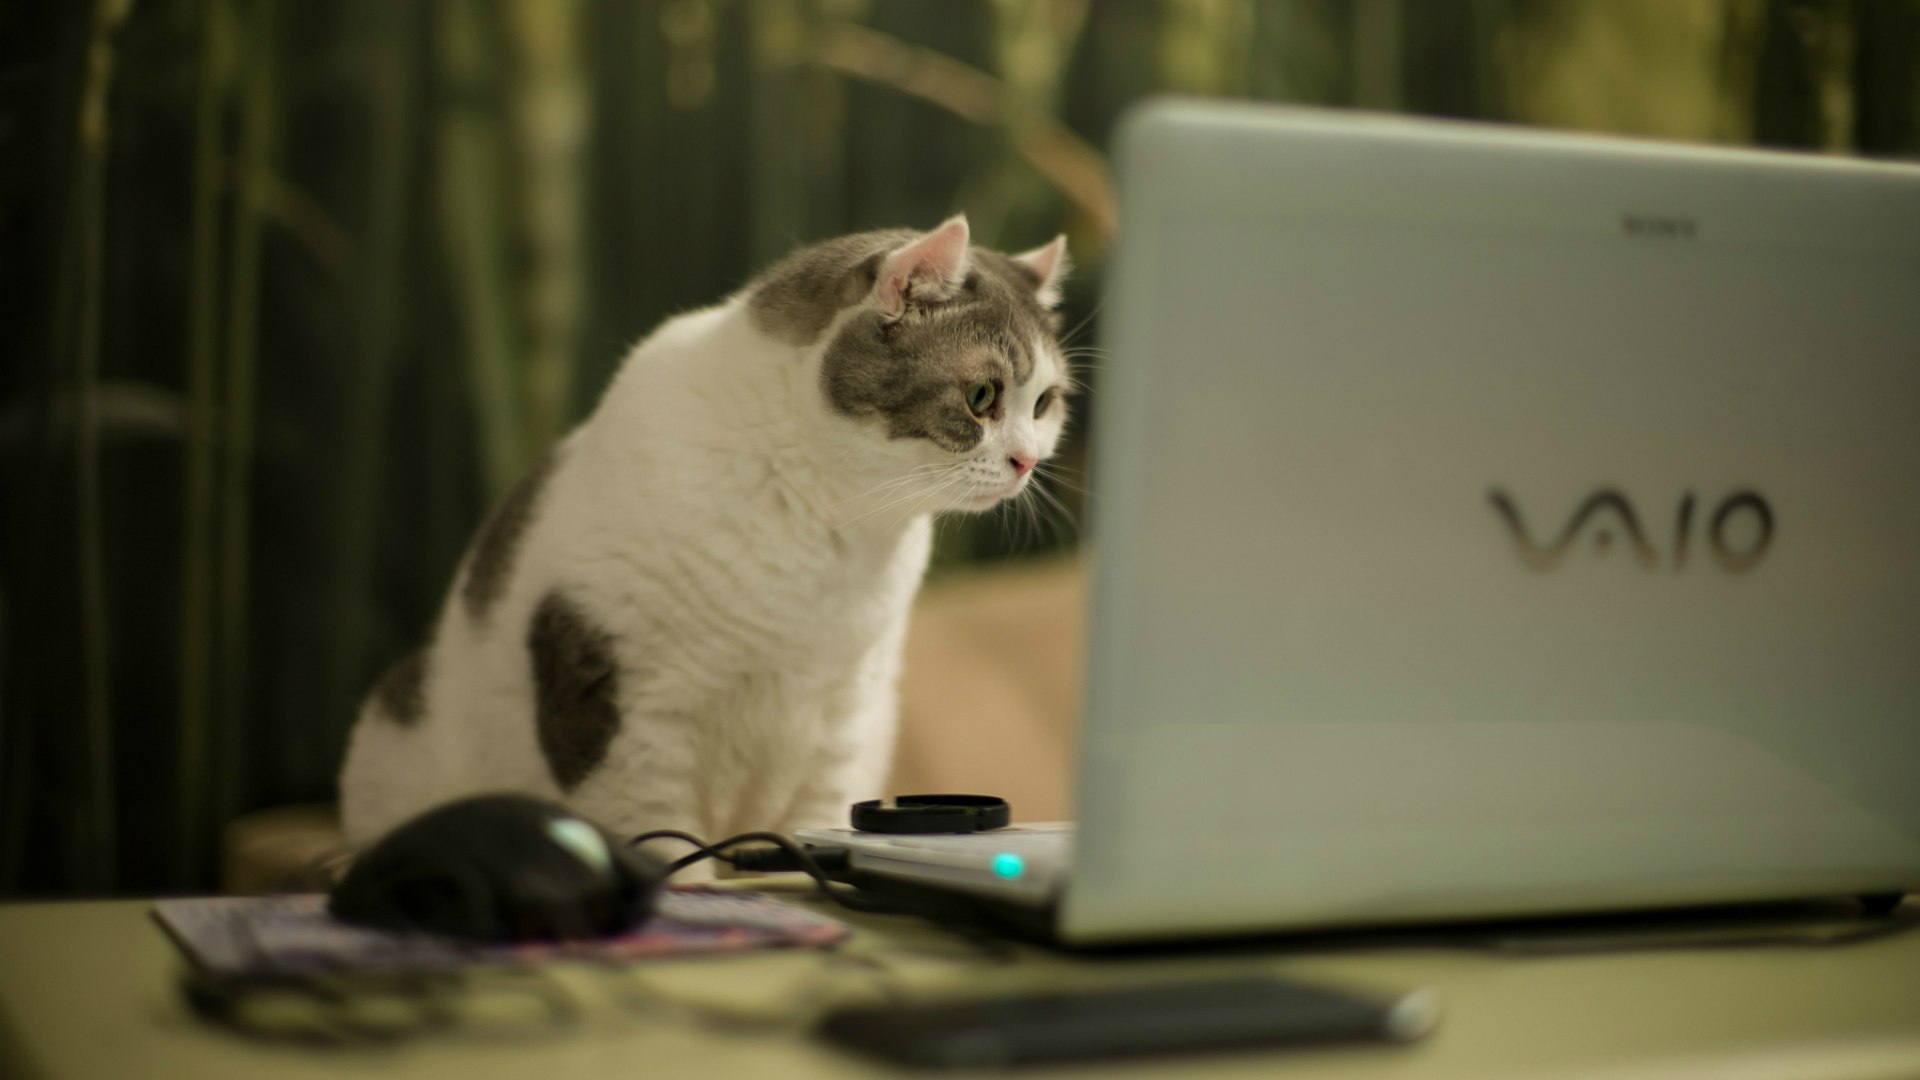 Cat looking at a laptop screen wallpapers and images - wallpapers